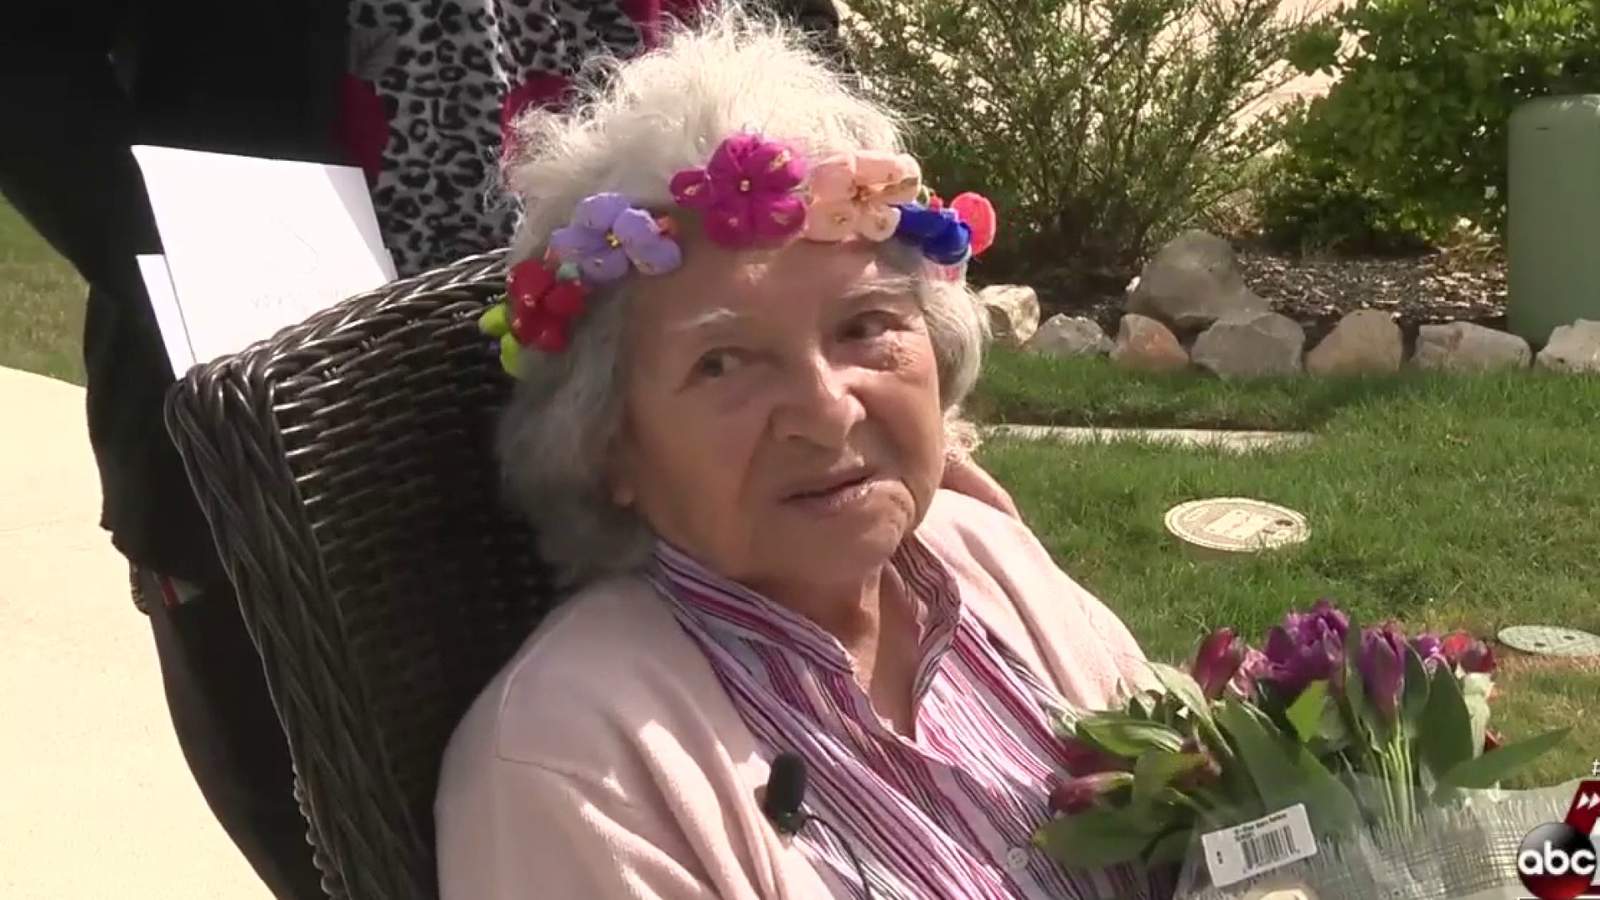 96-year-old SA native celebrates birthday a week after fire burns her house down